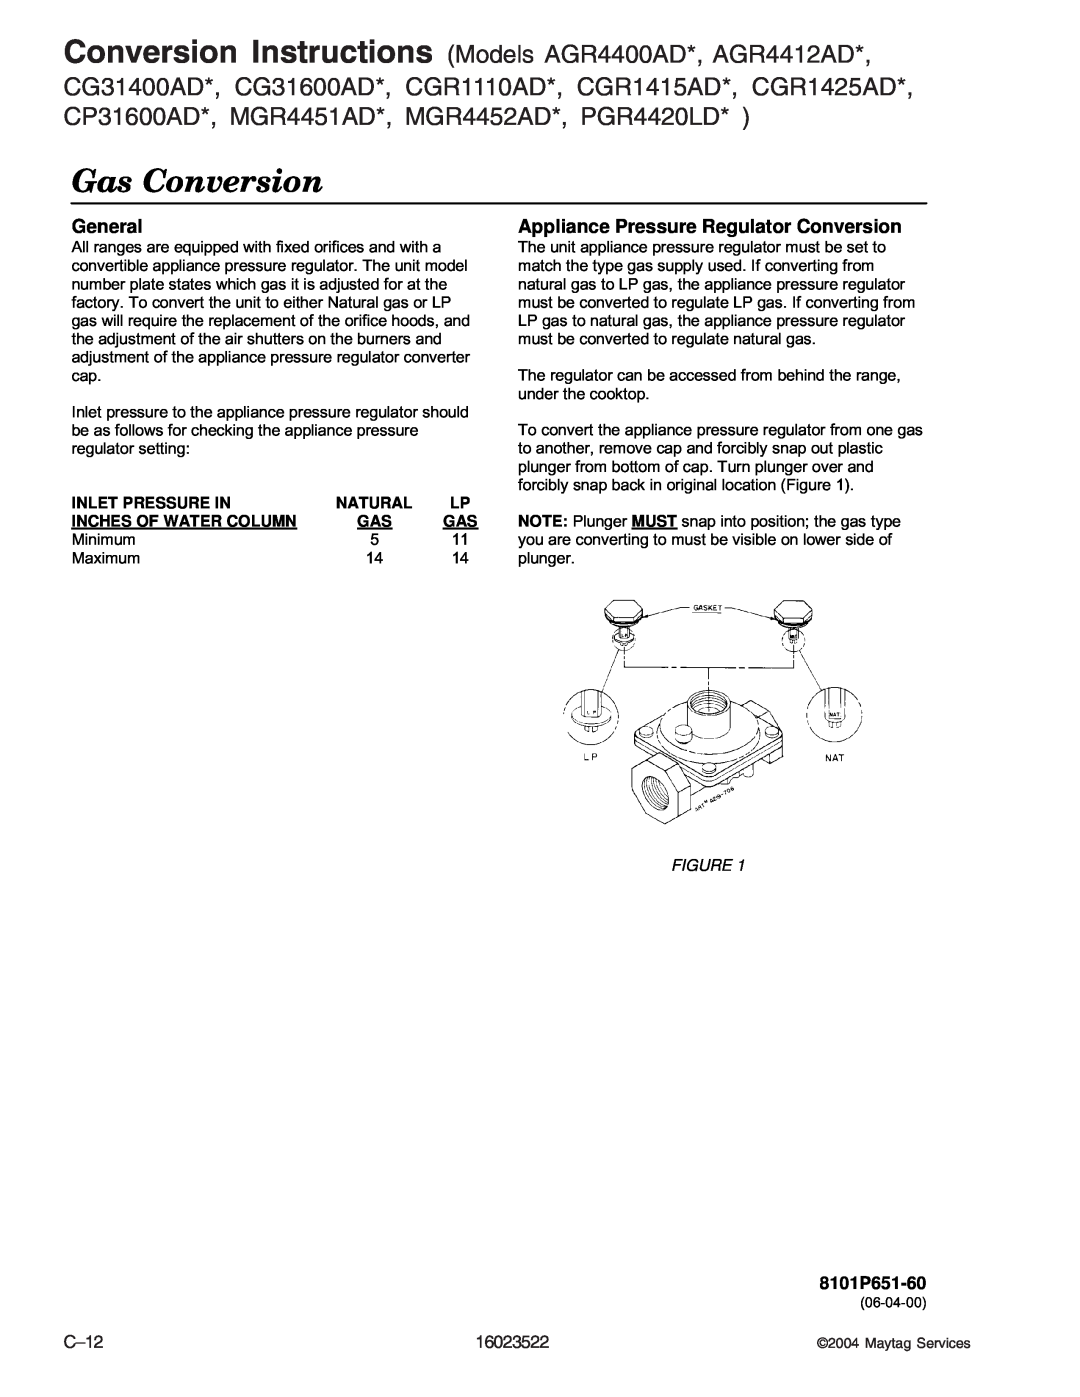 Maytag CPR1100ADQ/W manual Gas Conversion, General, Appliance Pressure Regulator Conversion, Inlet Pressure In, Natural 